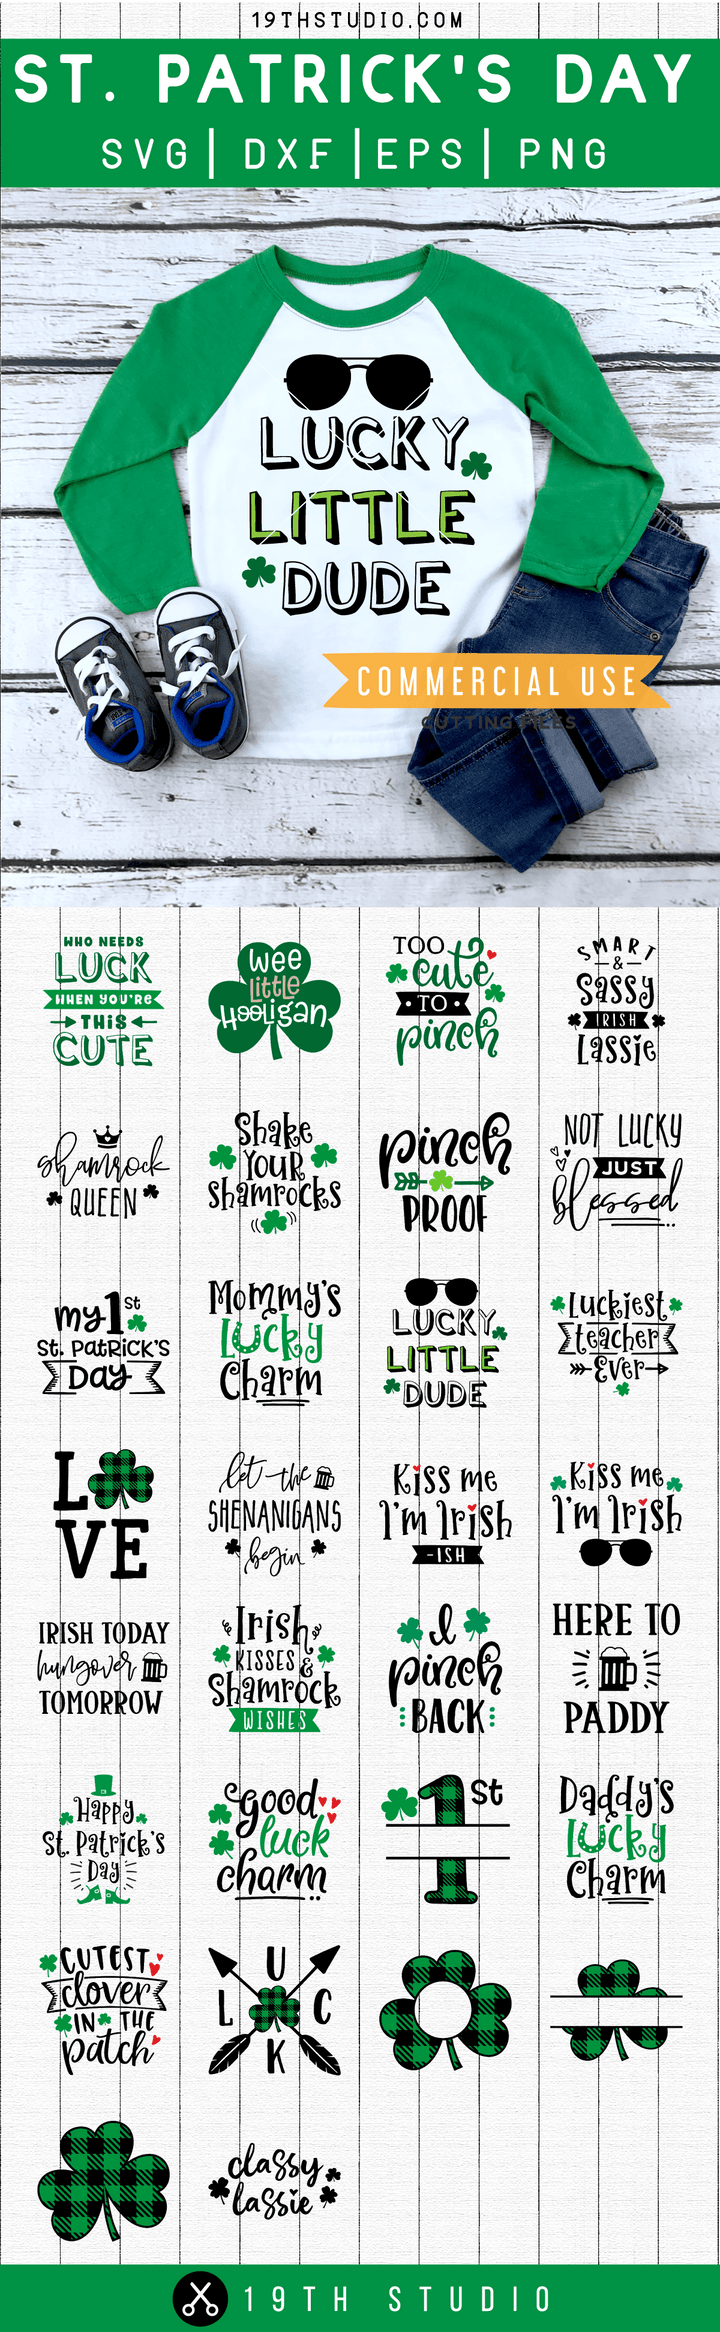 St. Patrick's Day SVG Bundle | MB45 Craft House SVG - SVG files for Cricut and Silhouette